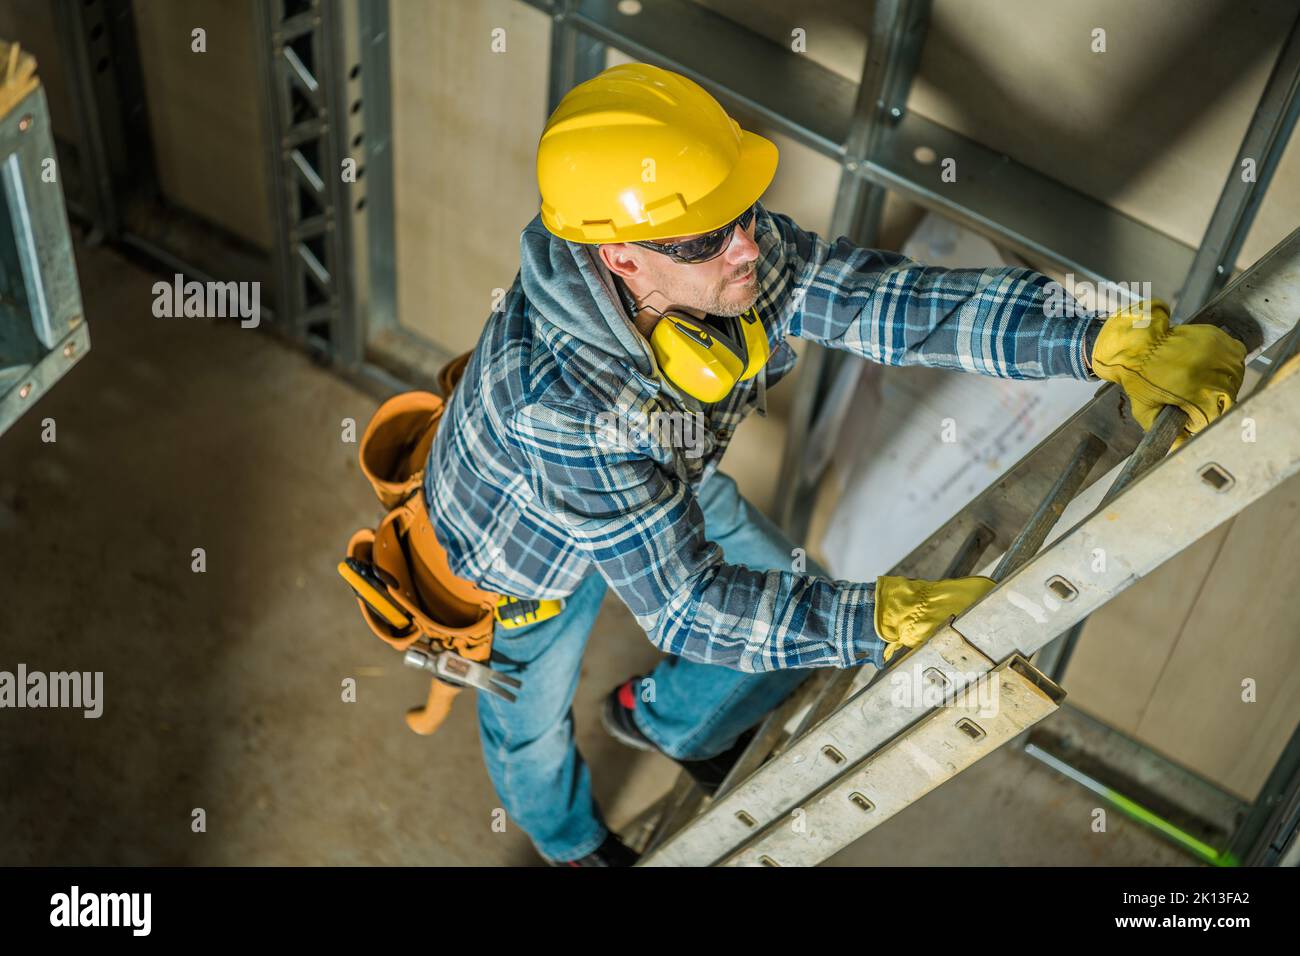 Top View Photo of Professional Contractor in Yellow Hard Hat Climbing the Ladder at the Construction Site. Building Tools and Equipment in Use. Stock Photo